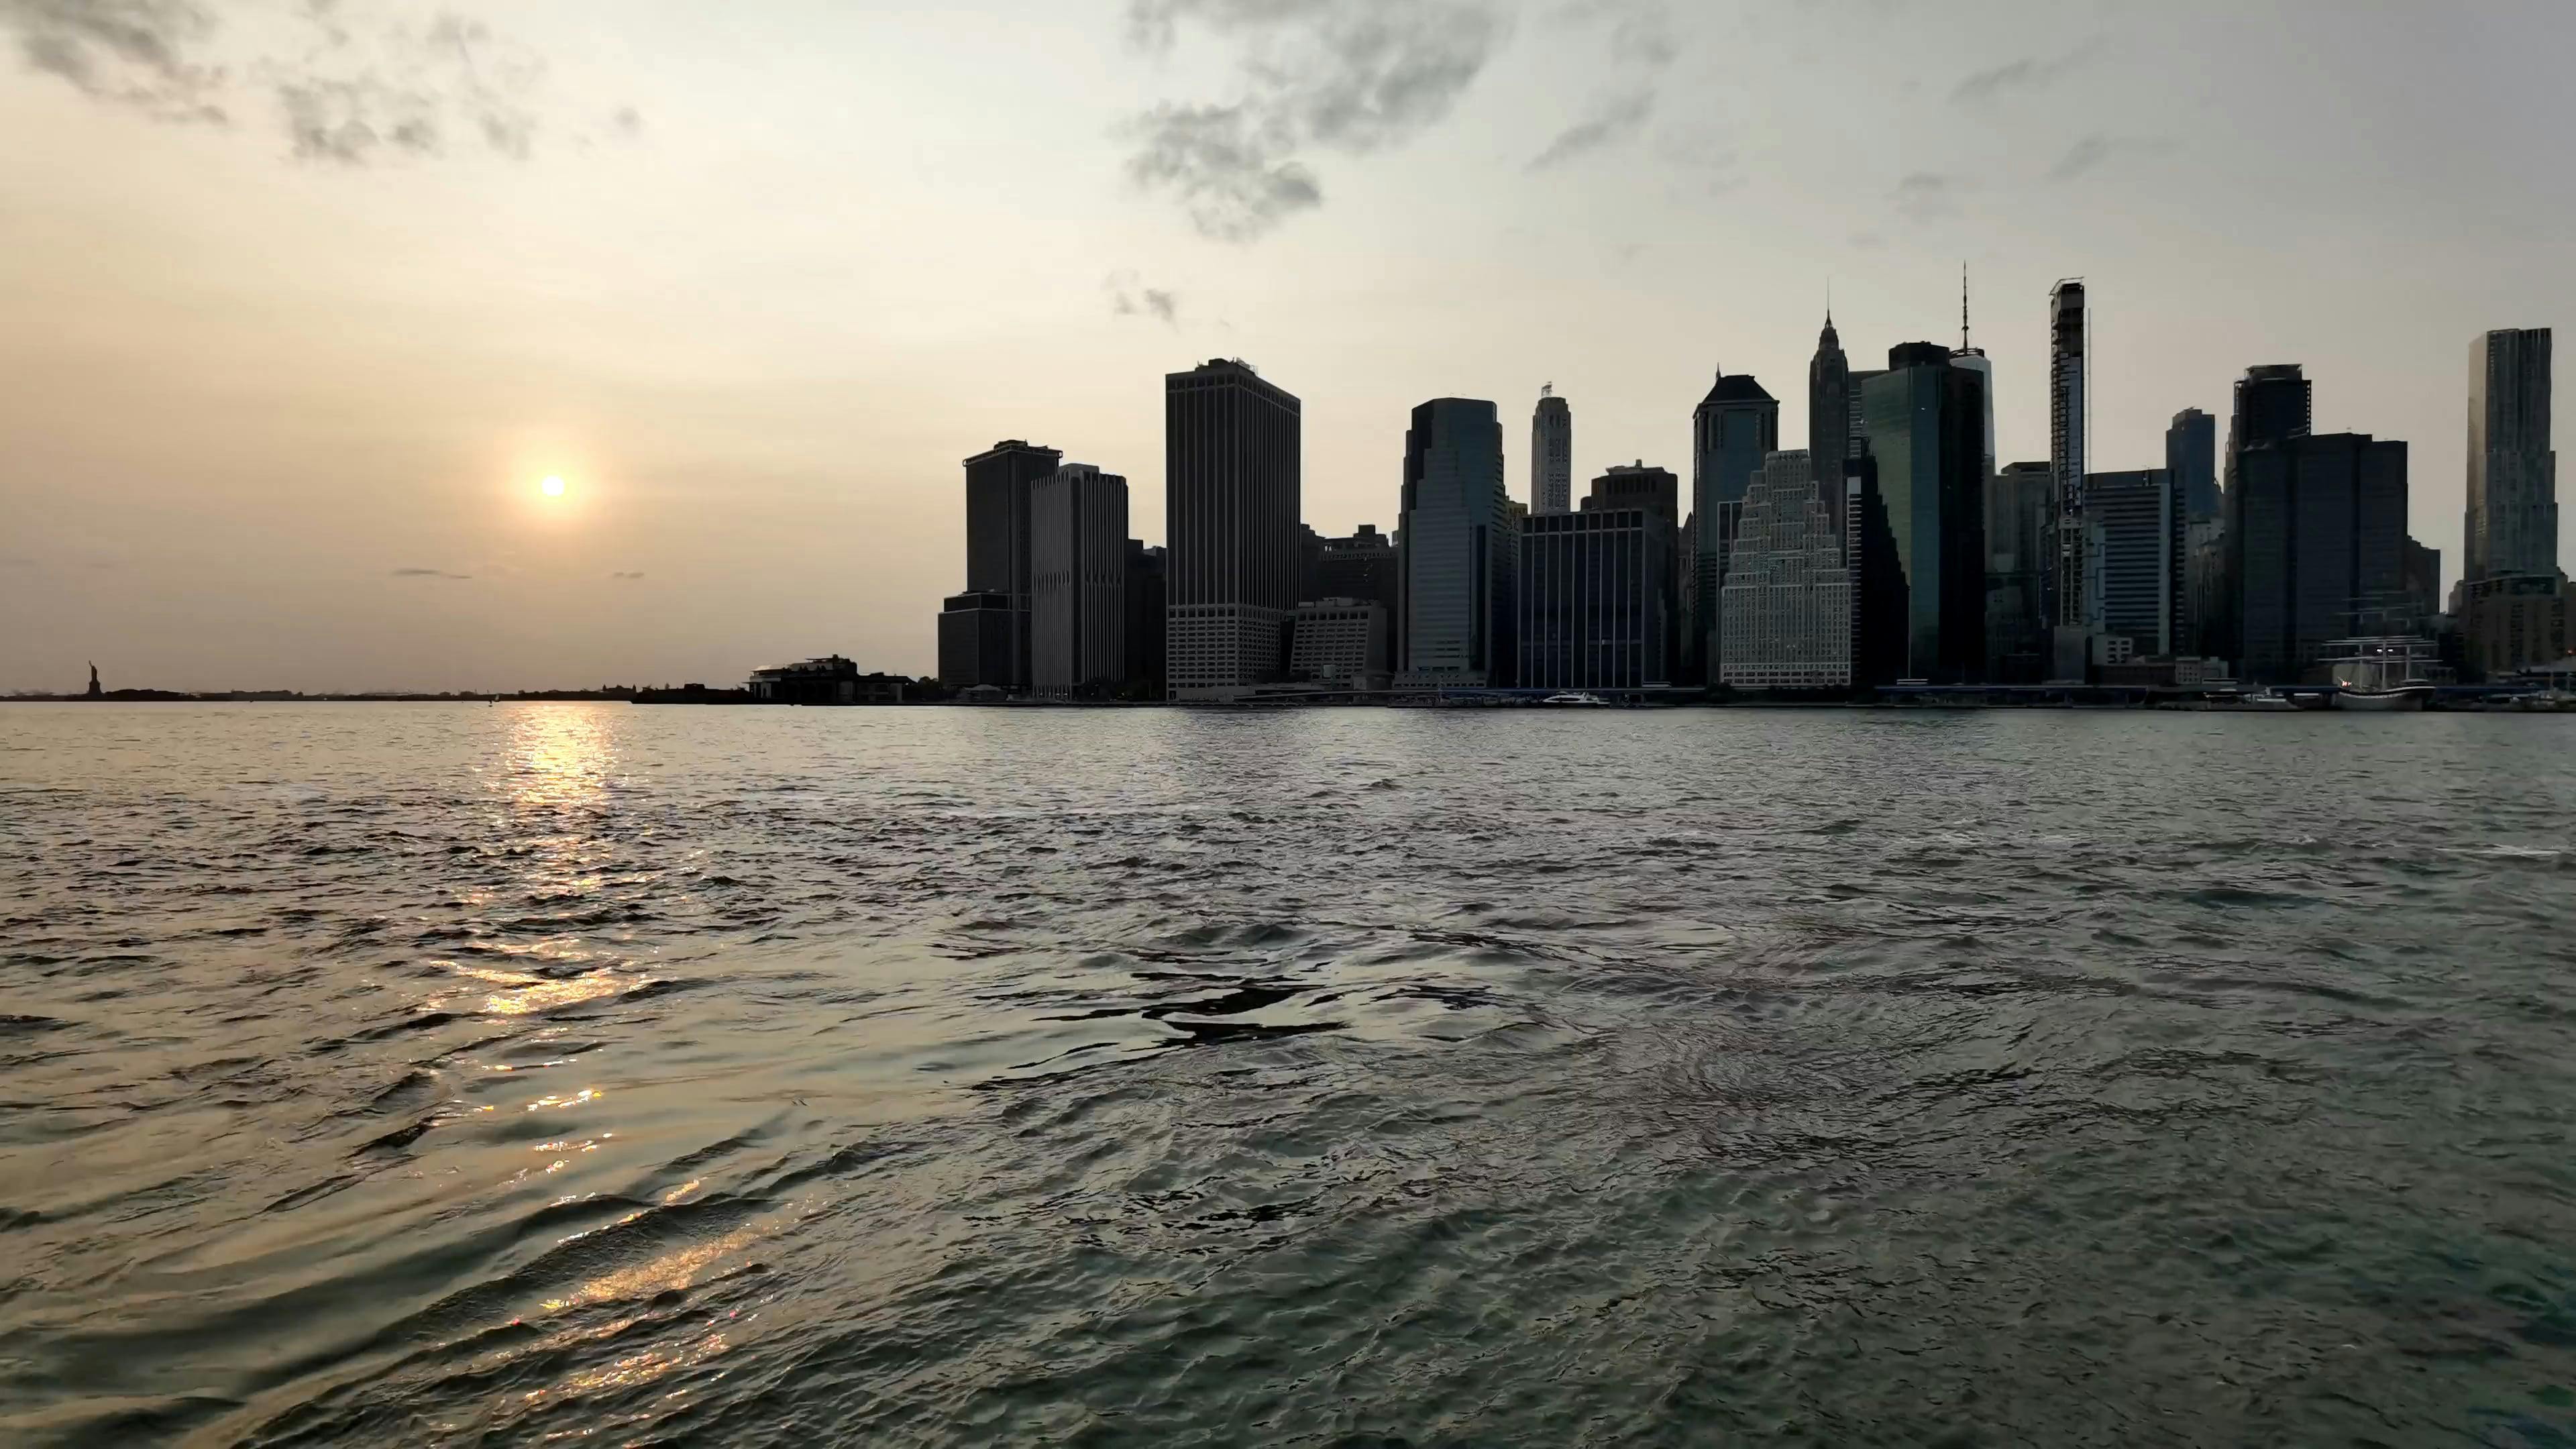 New York City Wallpaper Videos, Download The BEST Free 4k Stock Video  Footage & New York City Wallpaper HD Video Clips